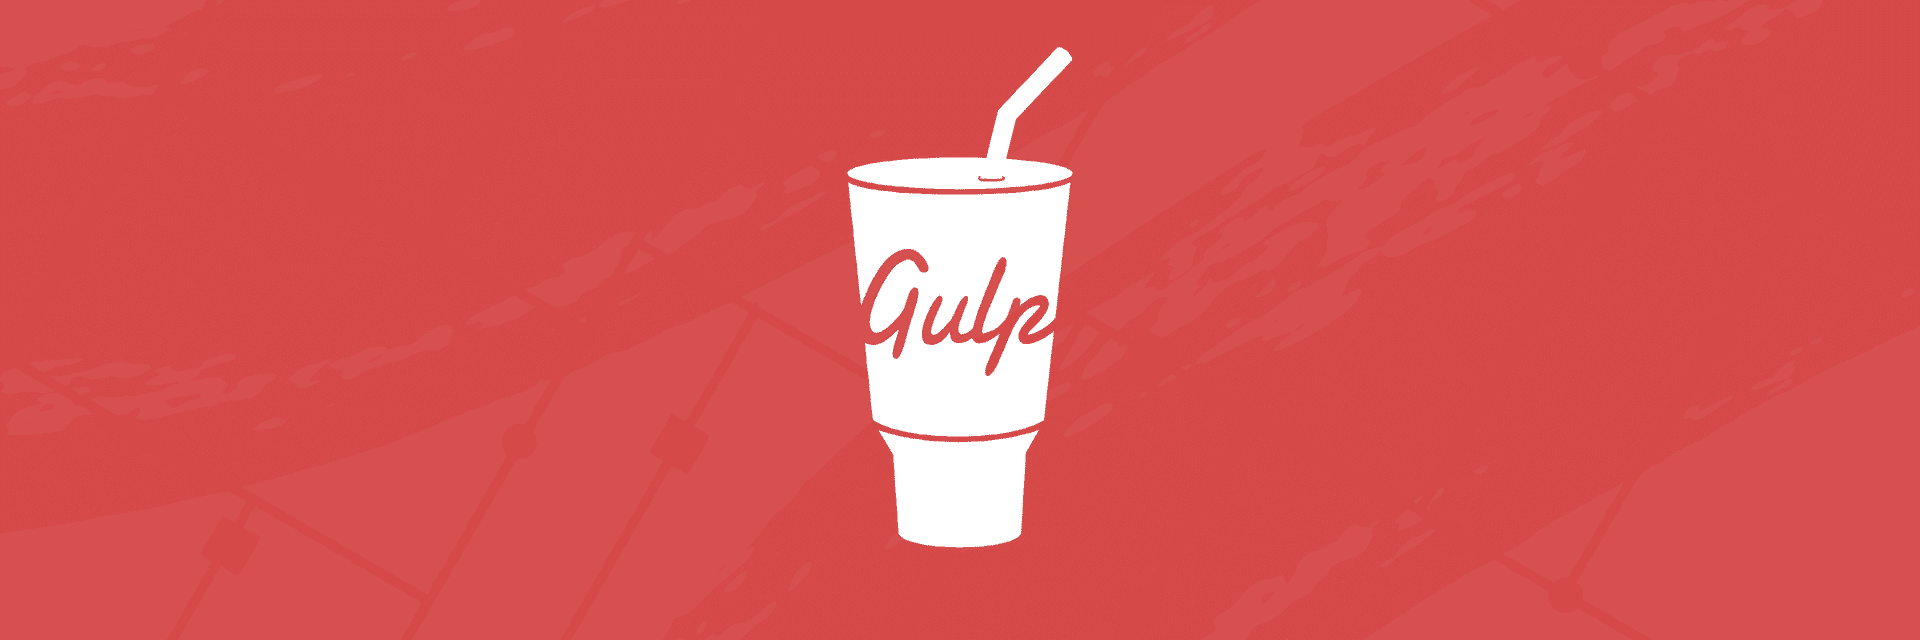 How to use Buddy to automate Gulp tasks and generate webfont from SVG files 